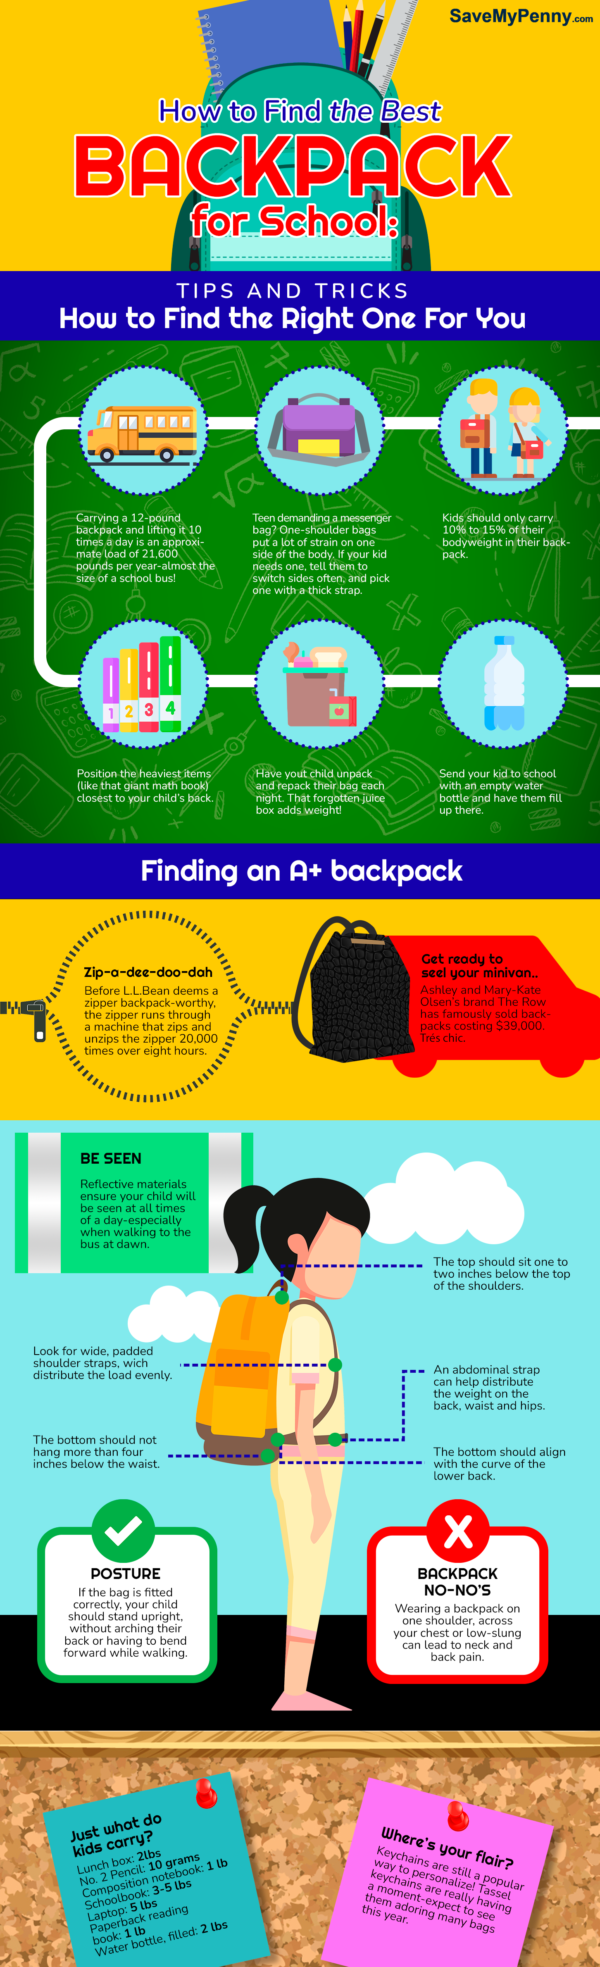 How to Find the Best Backpack for School Tips and Tricks PNG Image